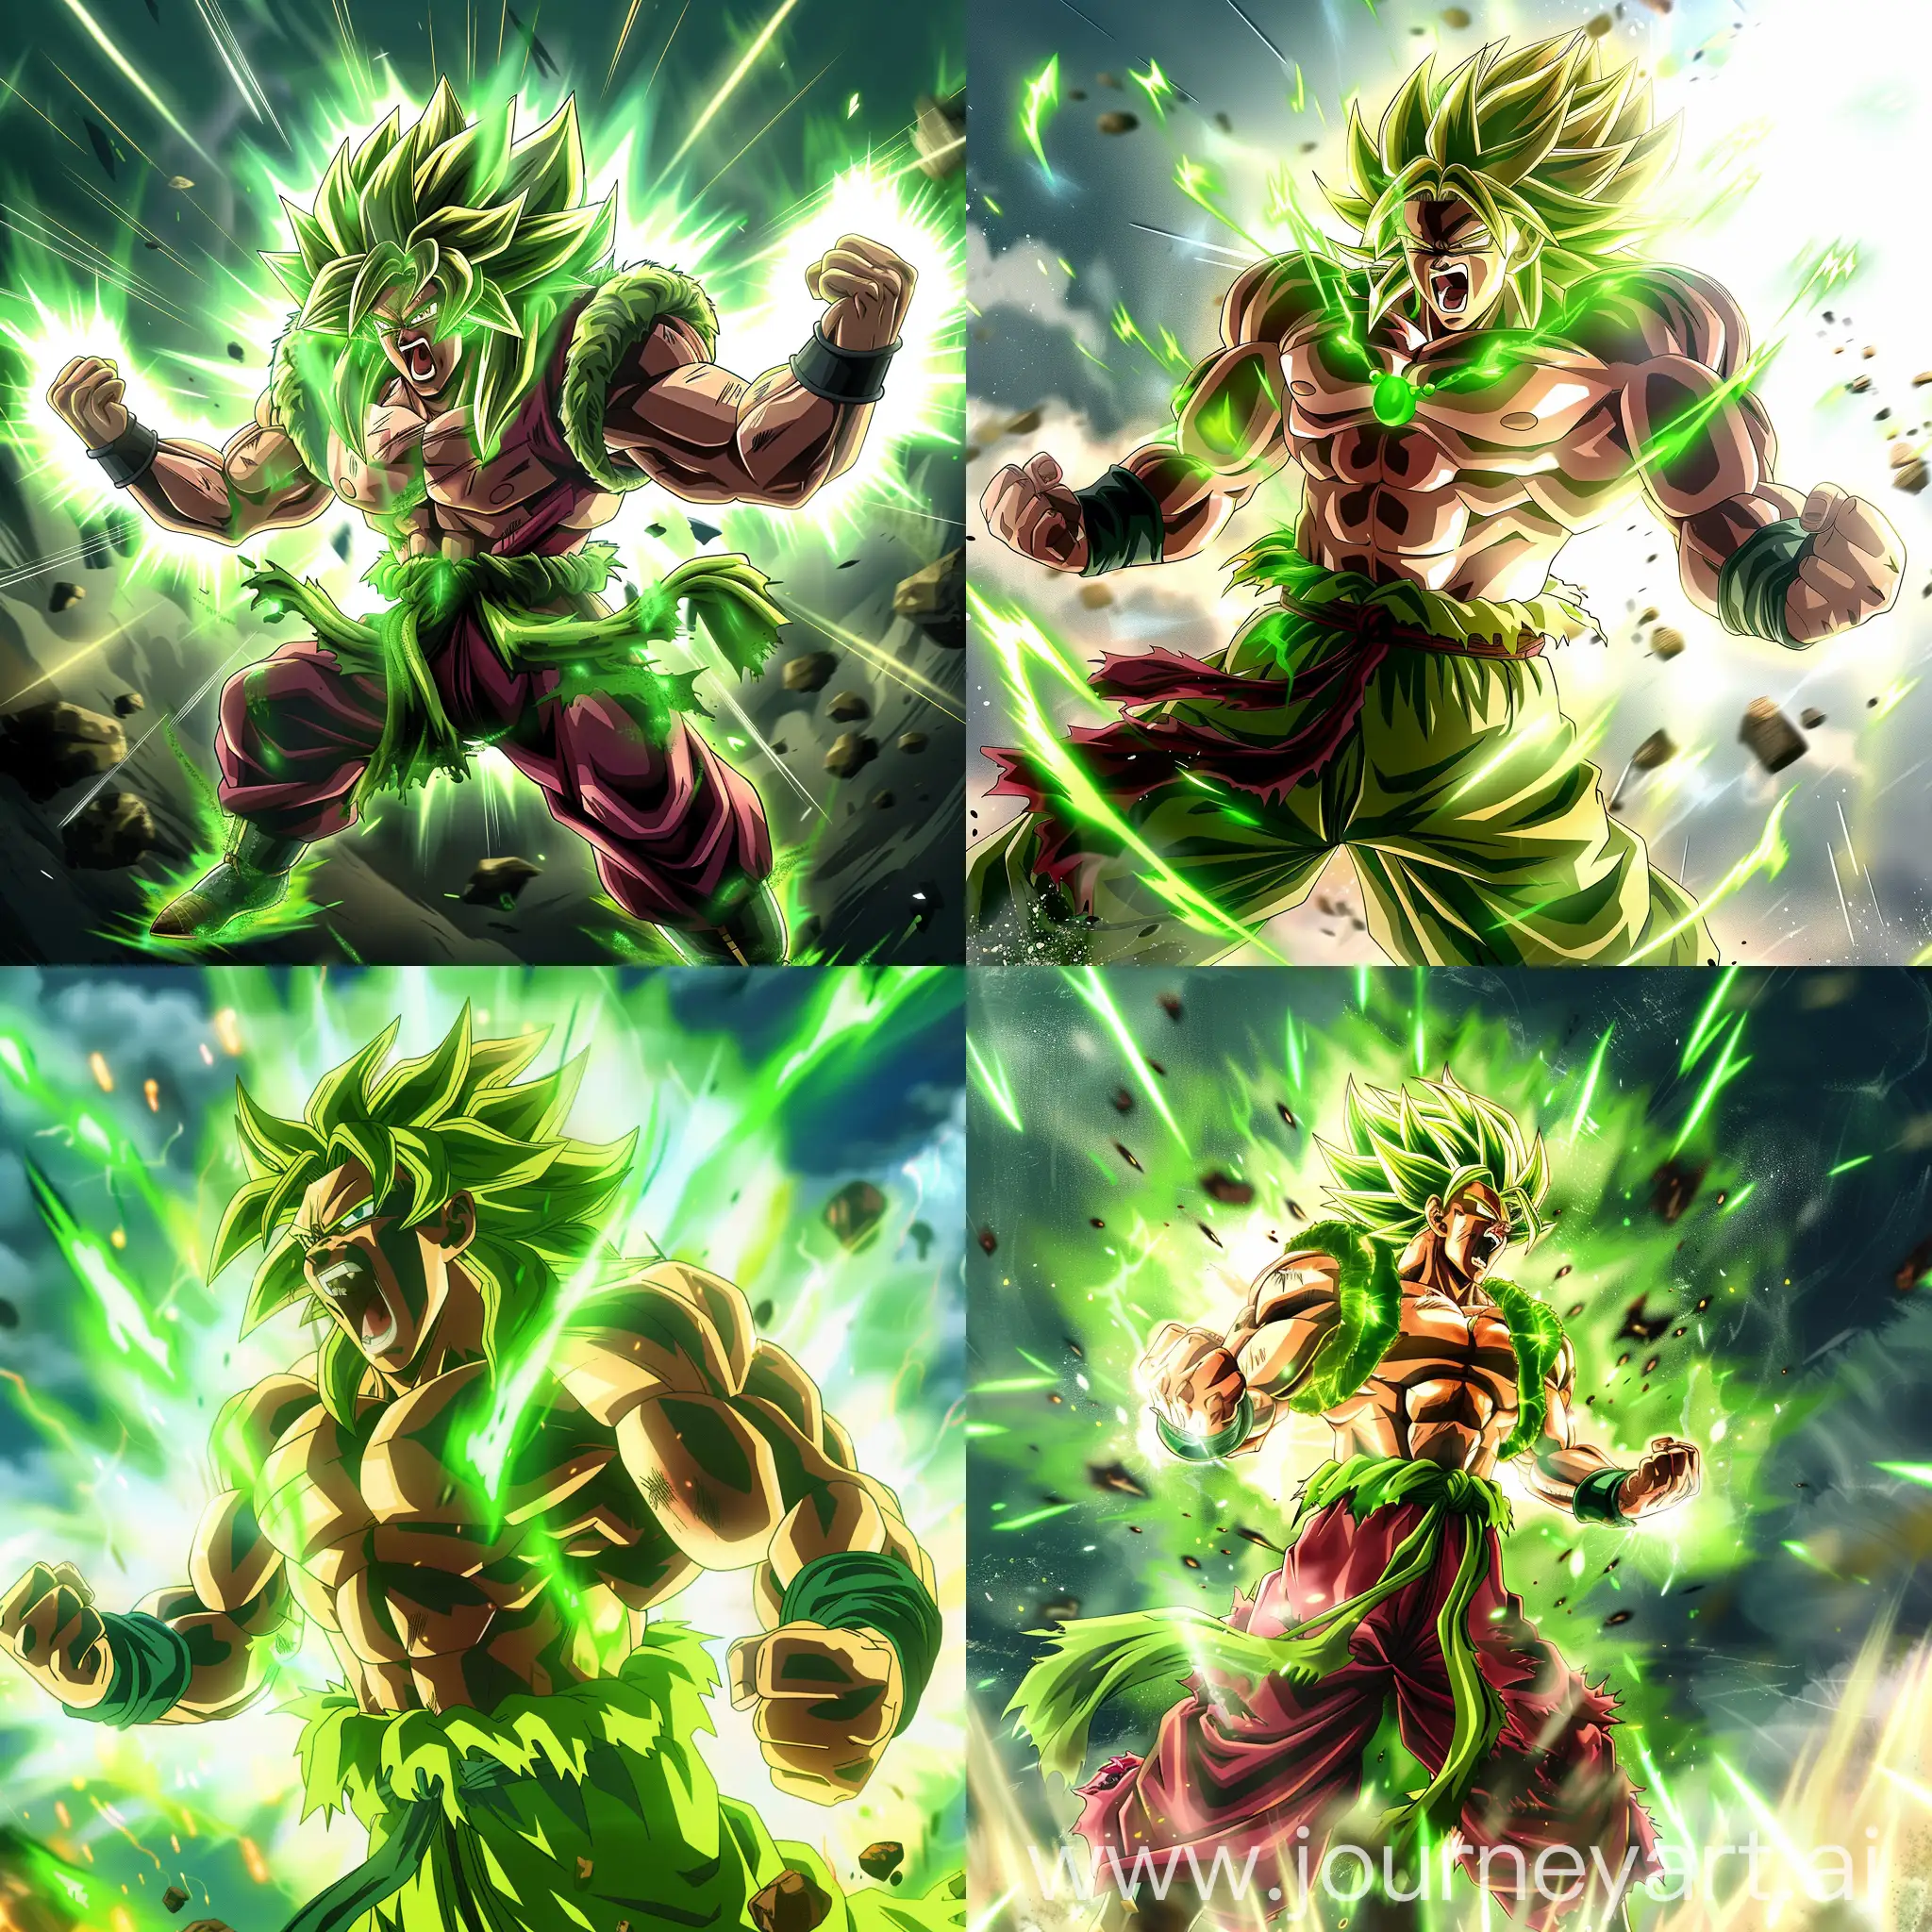 Broly the legendary super saiyan powering up to full power, intense, fierce, bursting green aura, roaring, powerful, big, strong, crushing, exploding with aura and power